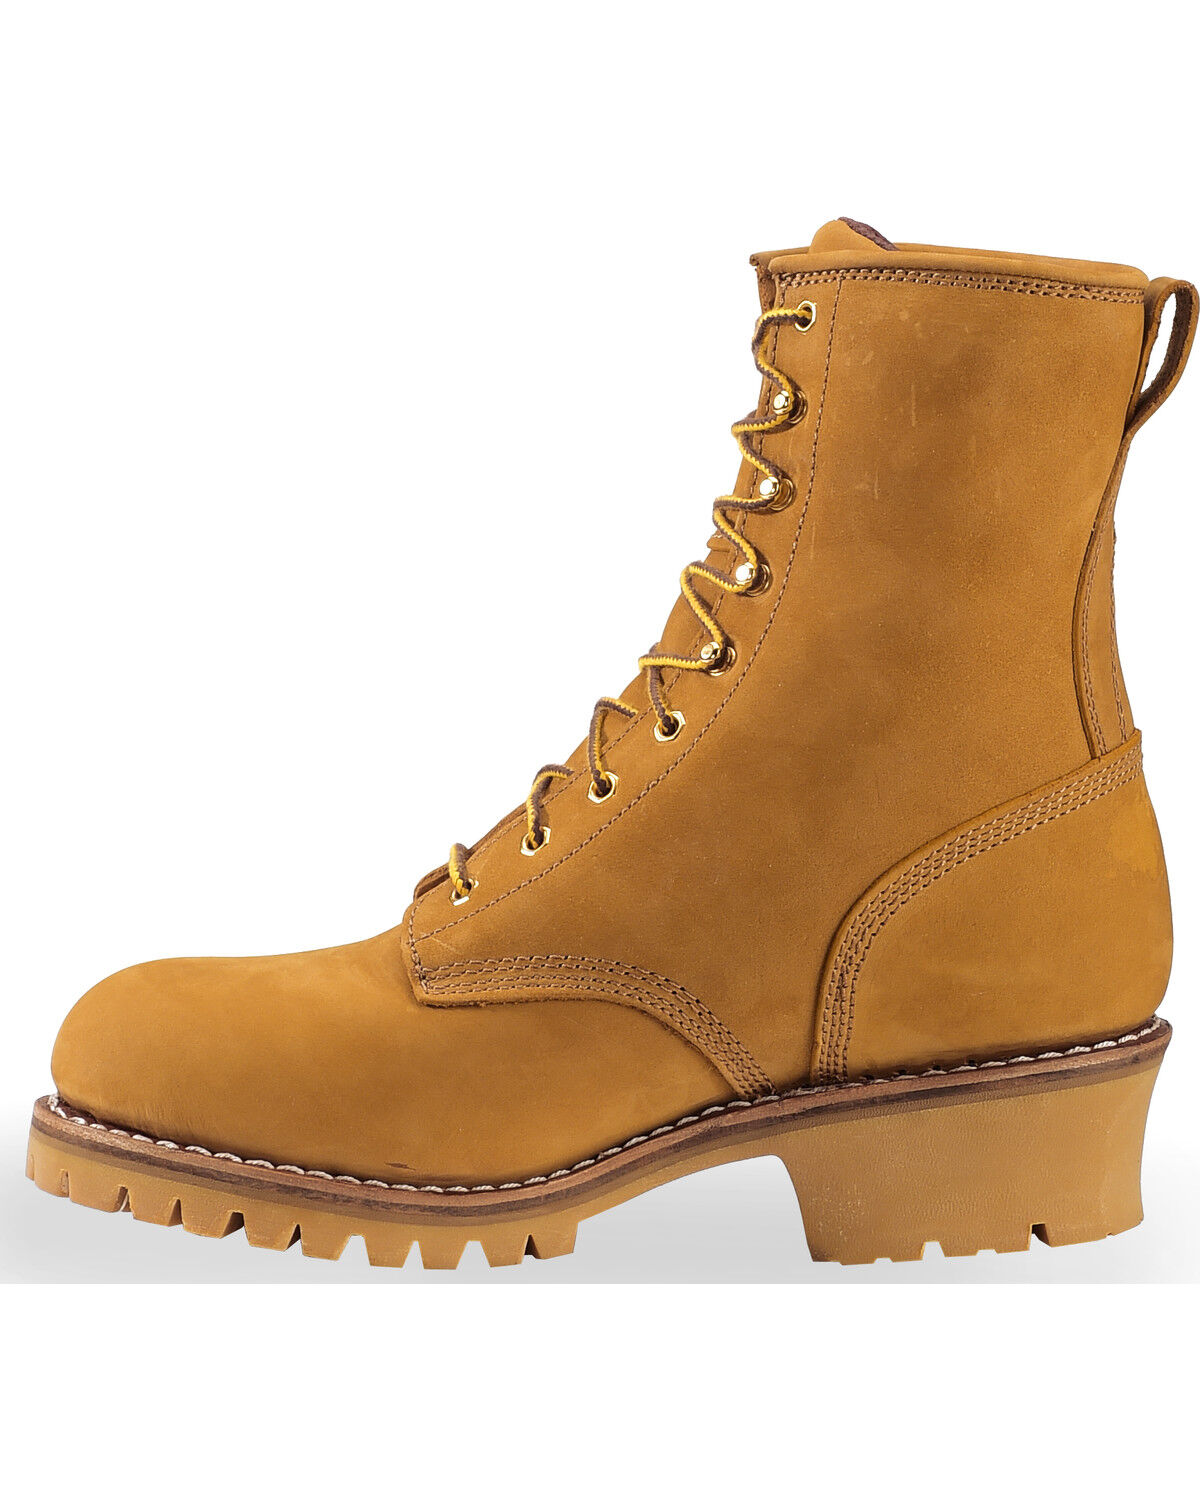 logger work boots on sale